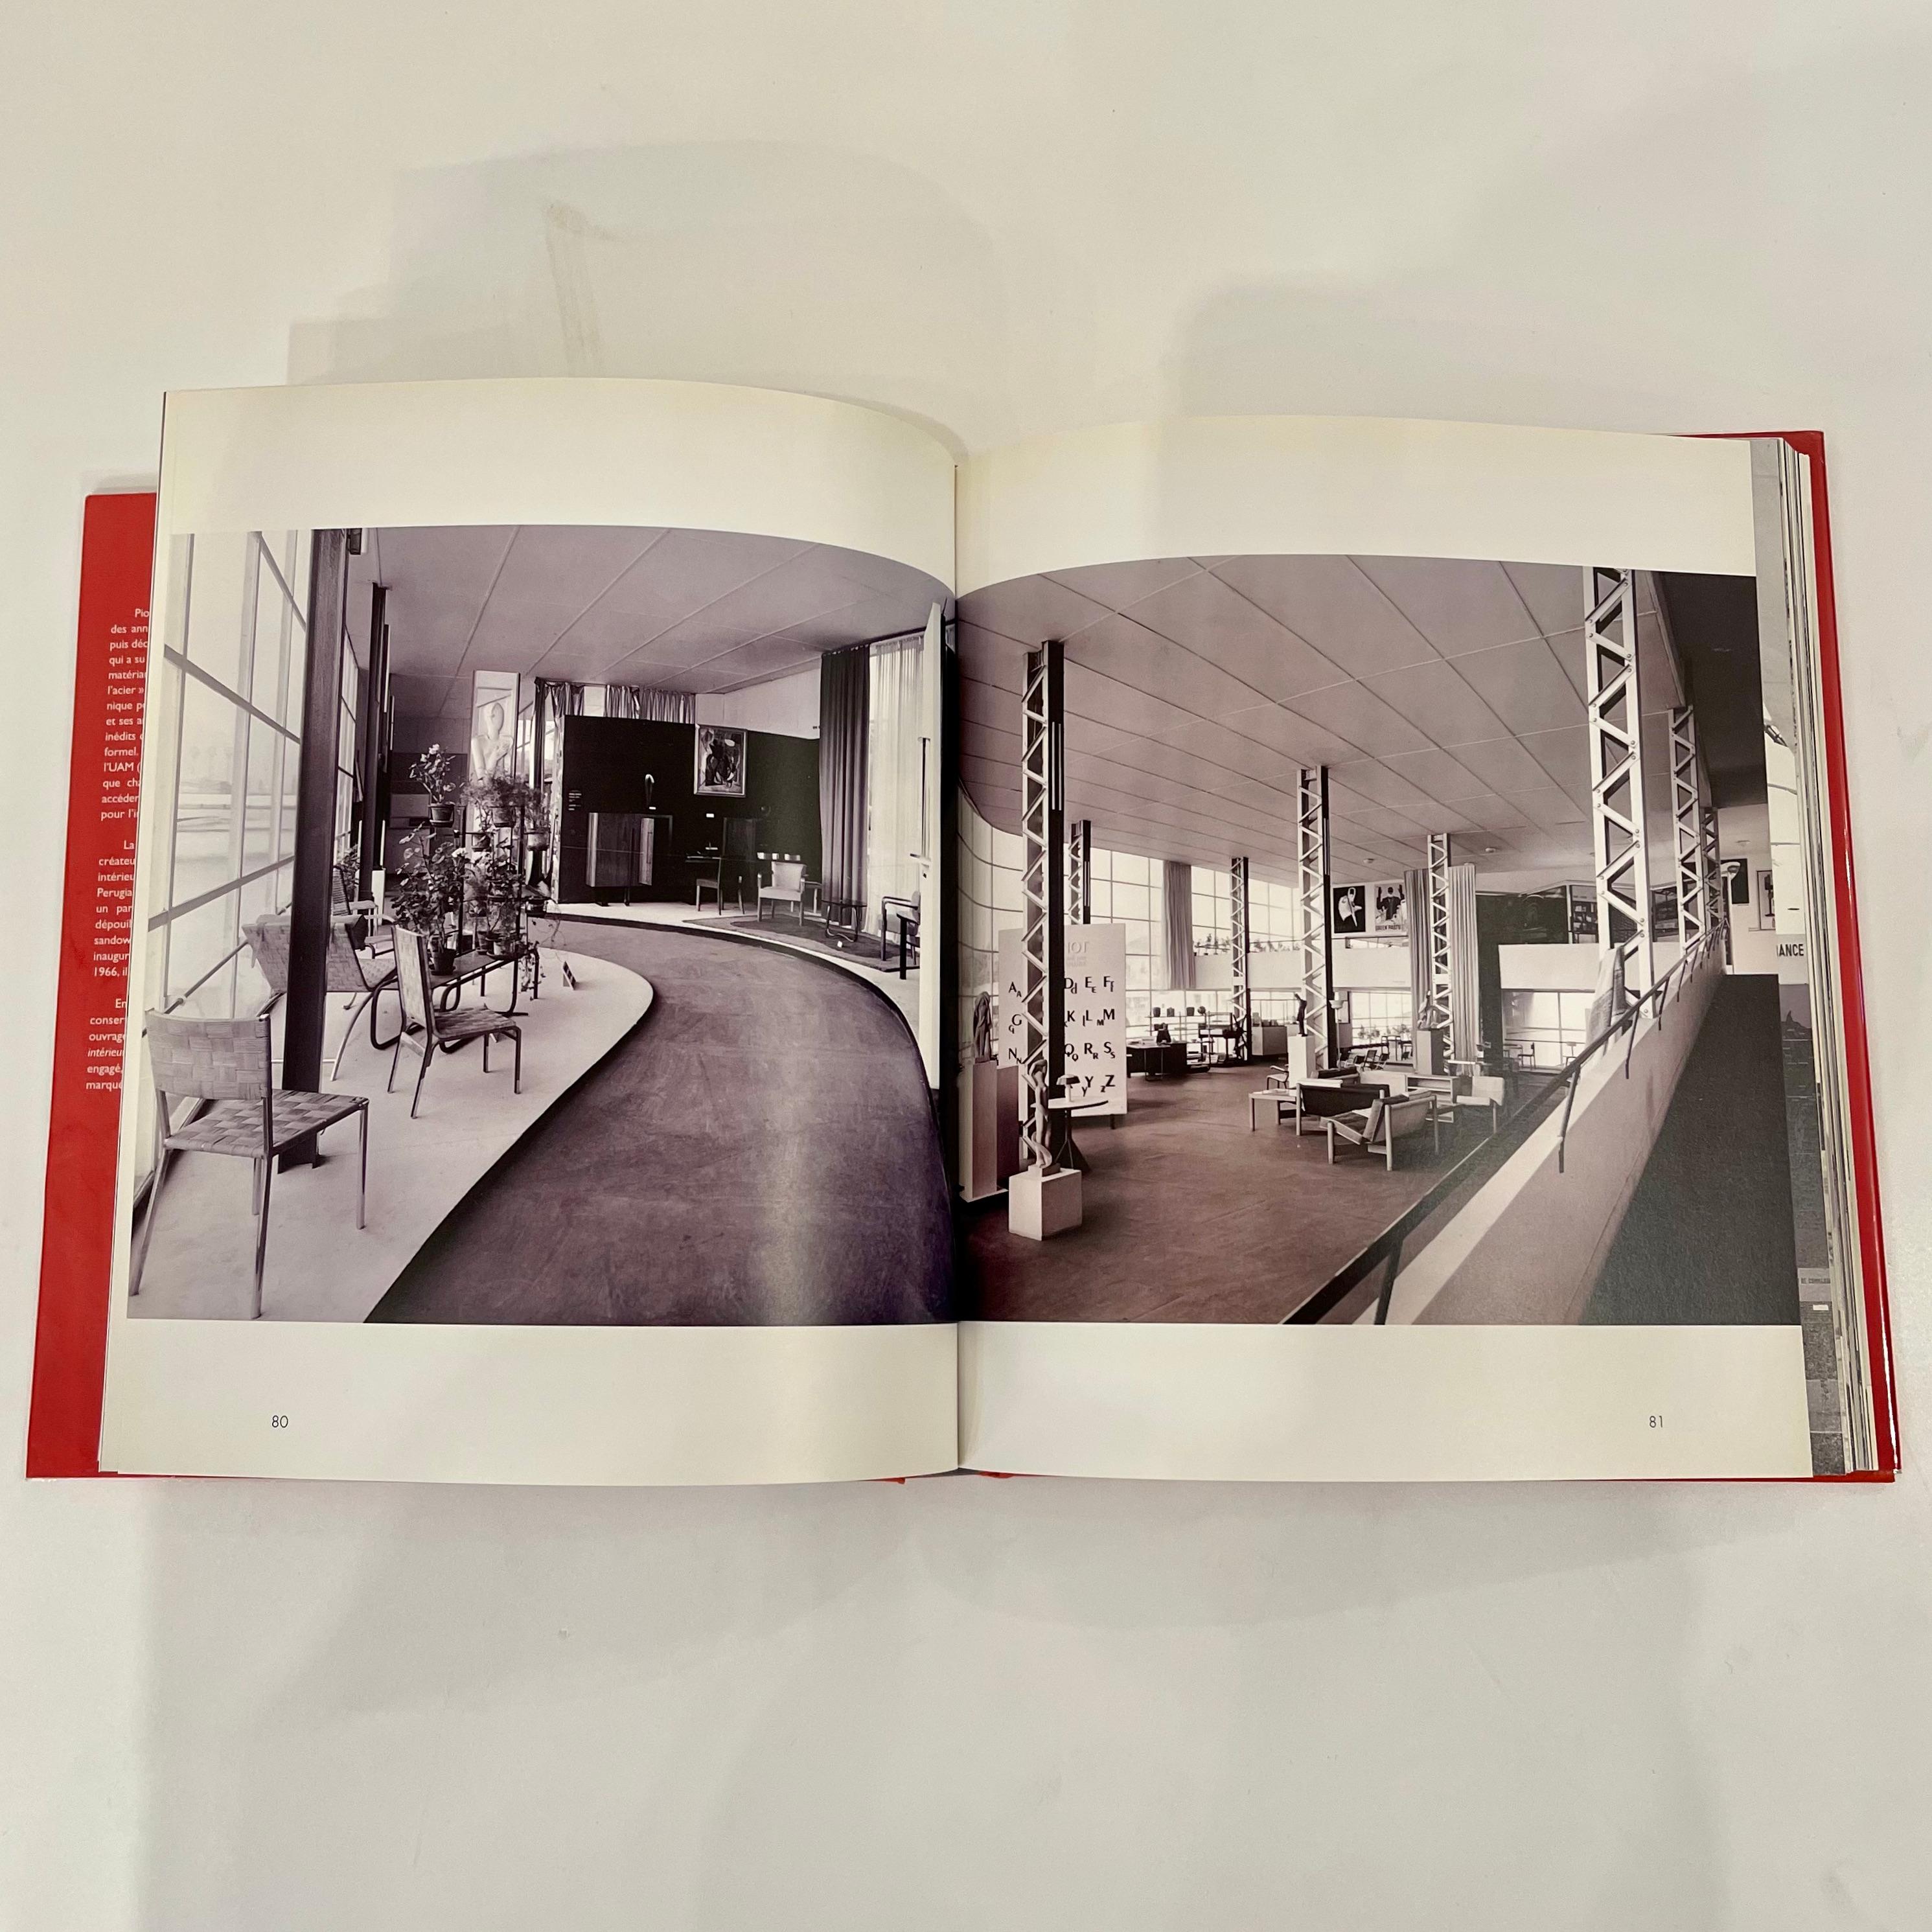 First Edition, Published by Flammarion in 2004 from the collection of the Archives d’Architecture Intérieure du XXe siècle at the Bibliothèque des Arts Décoratifs, Paris. Text by Guillemette Delaporte.

A rich visual and textual archive of the